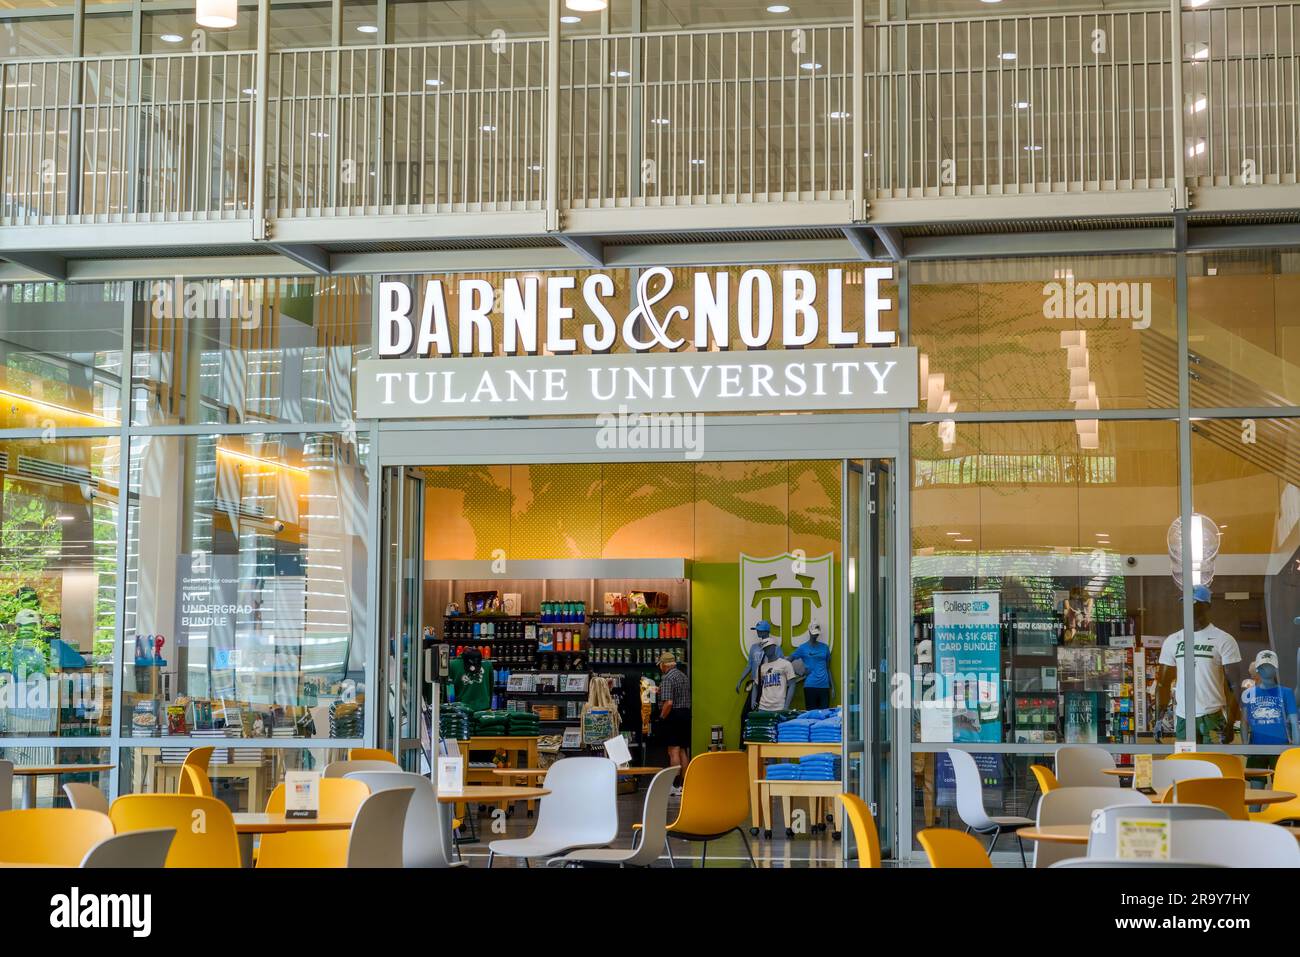 NEW ORLEANS, LA, USA - JUNE 23, 2023: Barnes and Noble bookstore in the Commons area of Tulane University Stock Photo